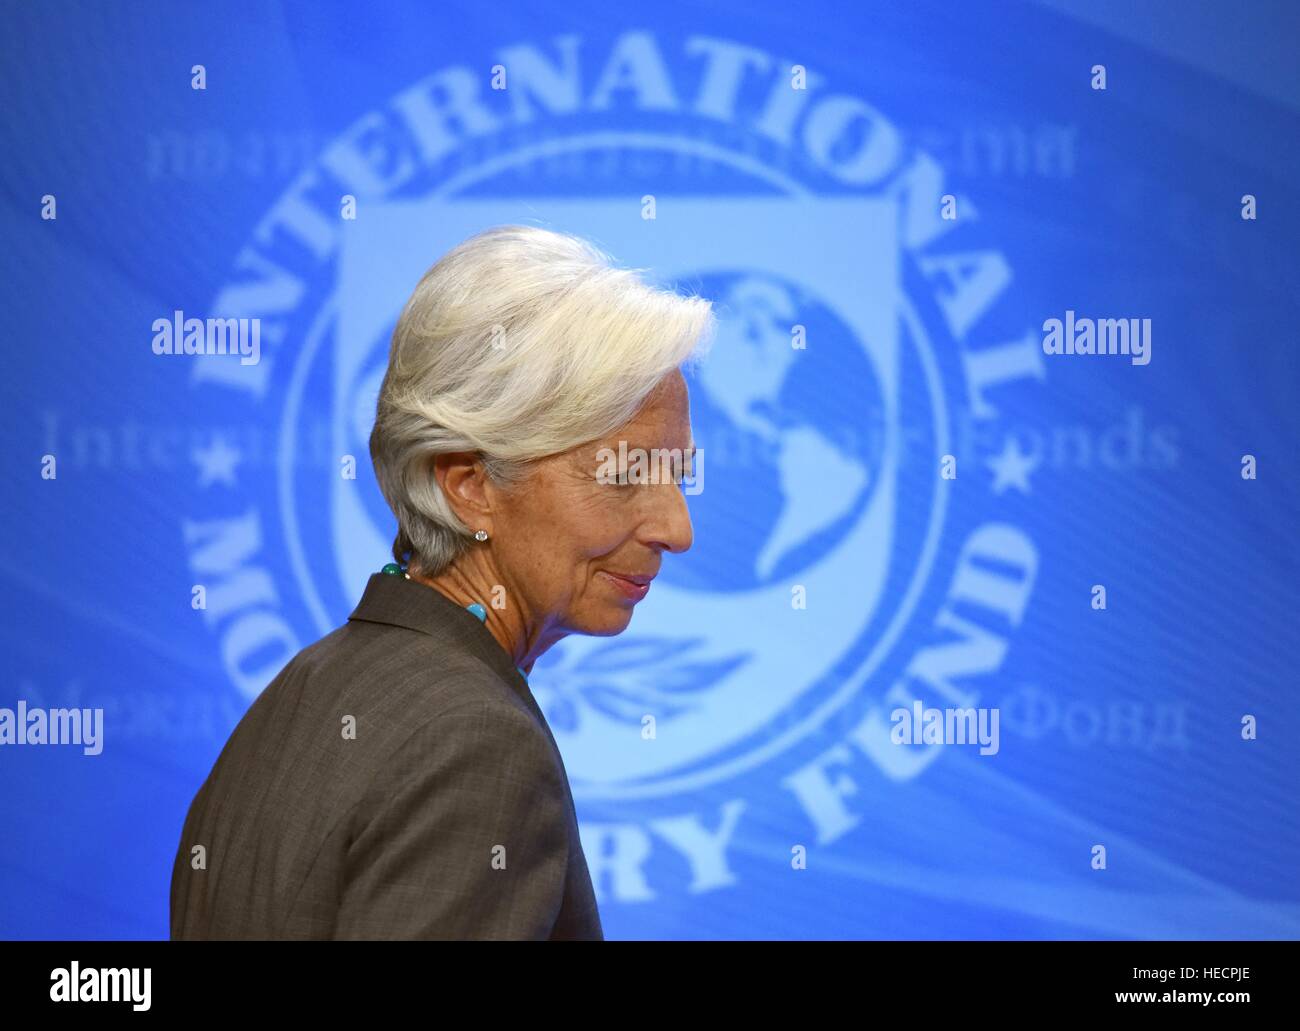 Washington, DC, USA. 19th Dec, 2016. File photo taken on June 22, 2016 shows International Monetary Fund (IMF) chief Christine Lagarde arriving for a press conference in Washington, DC, the United States. France's Court of Justice of the Republic on Dec. 19, 2016 found Christine Lagarde guilty of negligence over a state payout in 2008, but failed to sentence her. © Yin Bogu/Xinhua/Alamy Live News Stock Photo